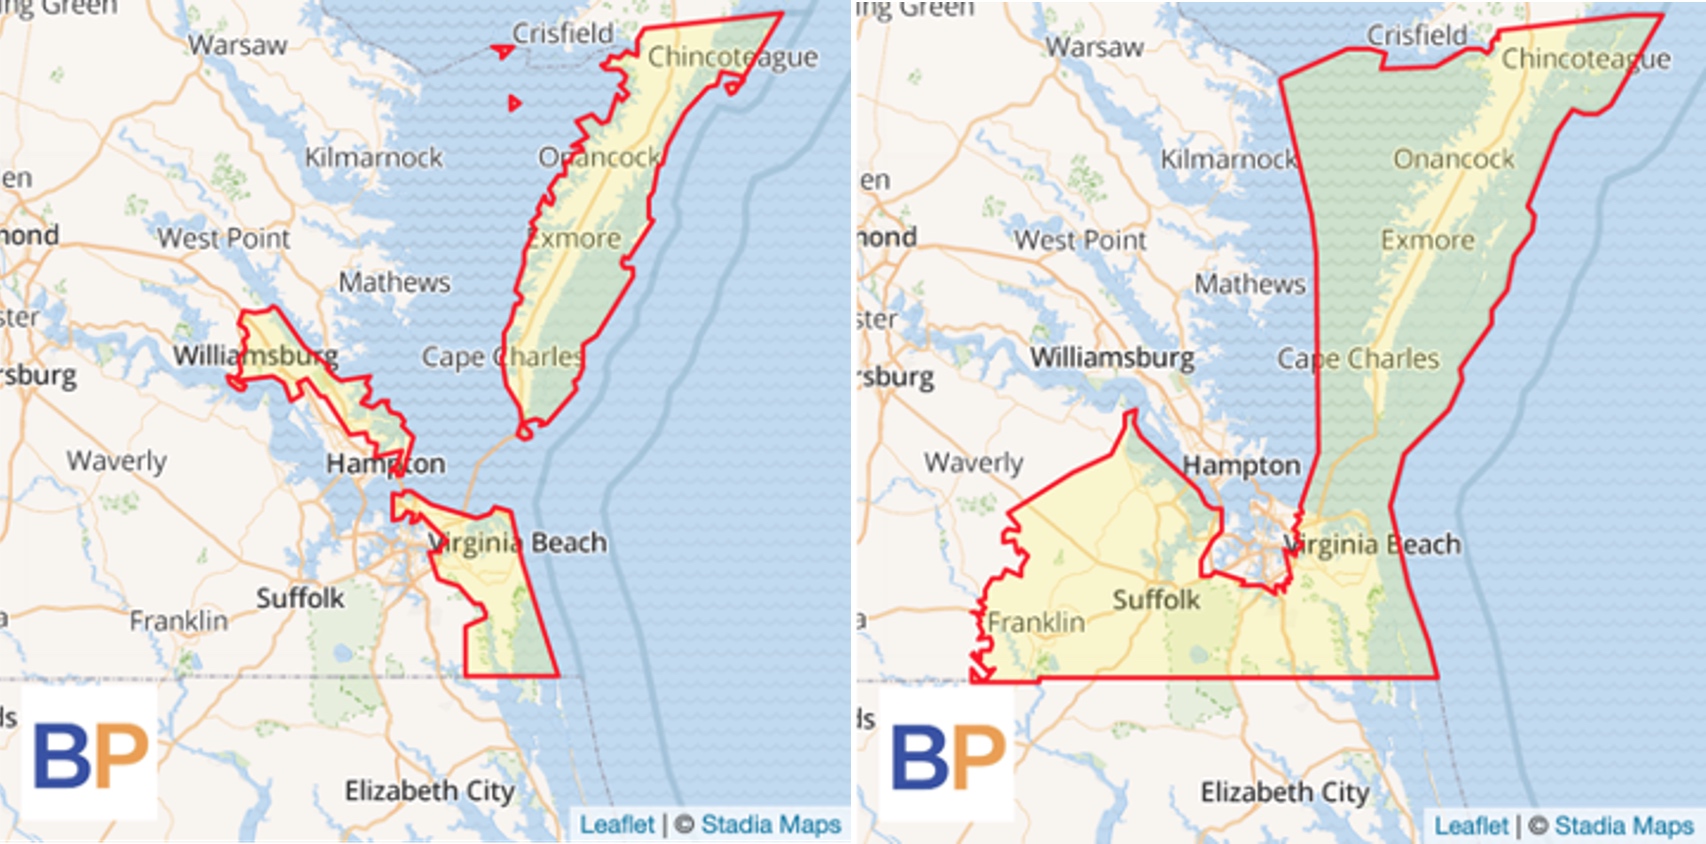 Two maps showing the old (left) and new (right) maps of Virginia's 2nd Congressional district. Both maps highlight land close to the eastern coast of Virginia.